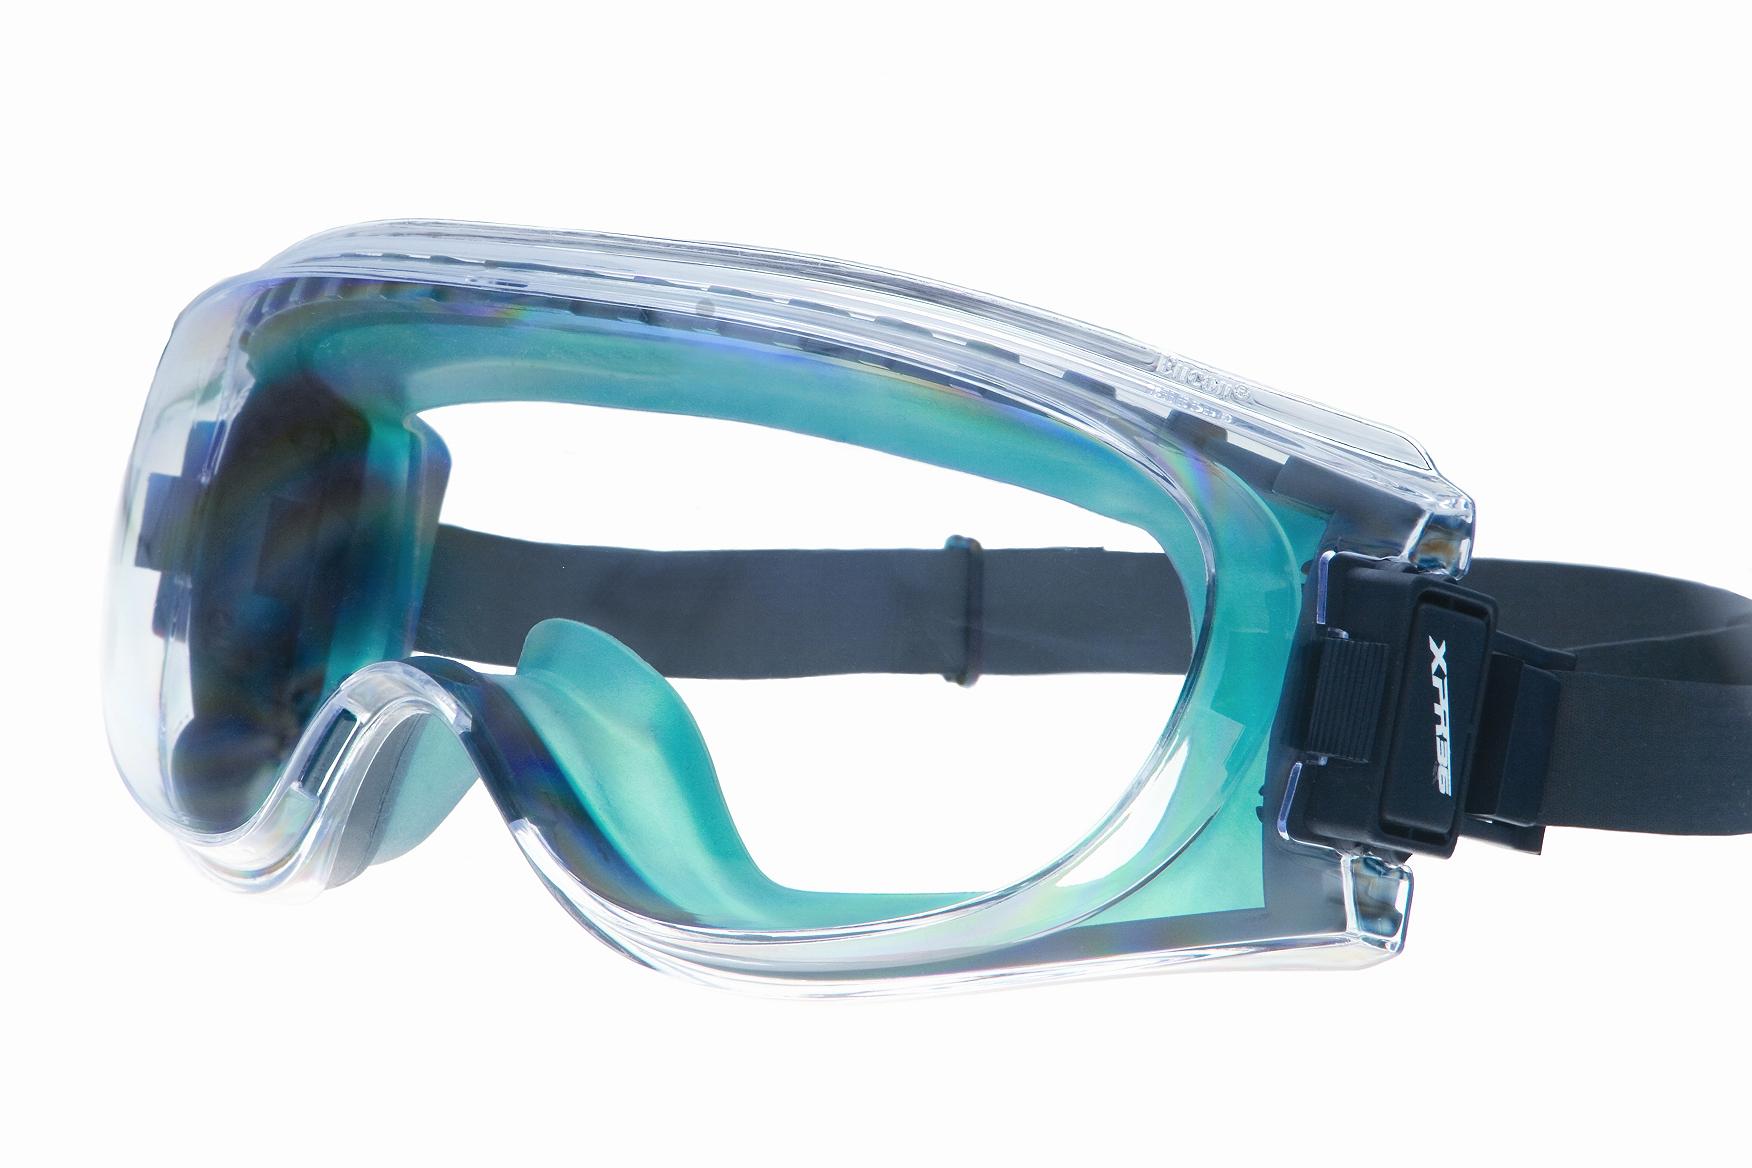 The sleek, ergonomic design of the XPR36 High Impact Chemical Splash Goggle provides maximum style and comfort with 360 Degree Circuitous Ventilation System (patent-pending) and the QD2 easy adjustment strap